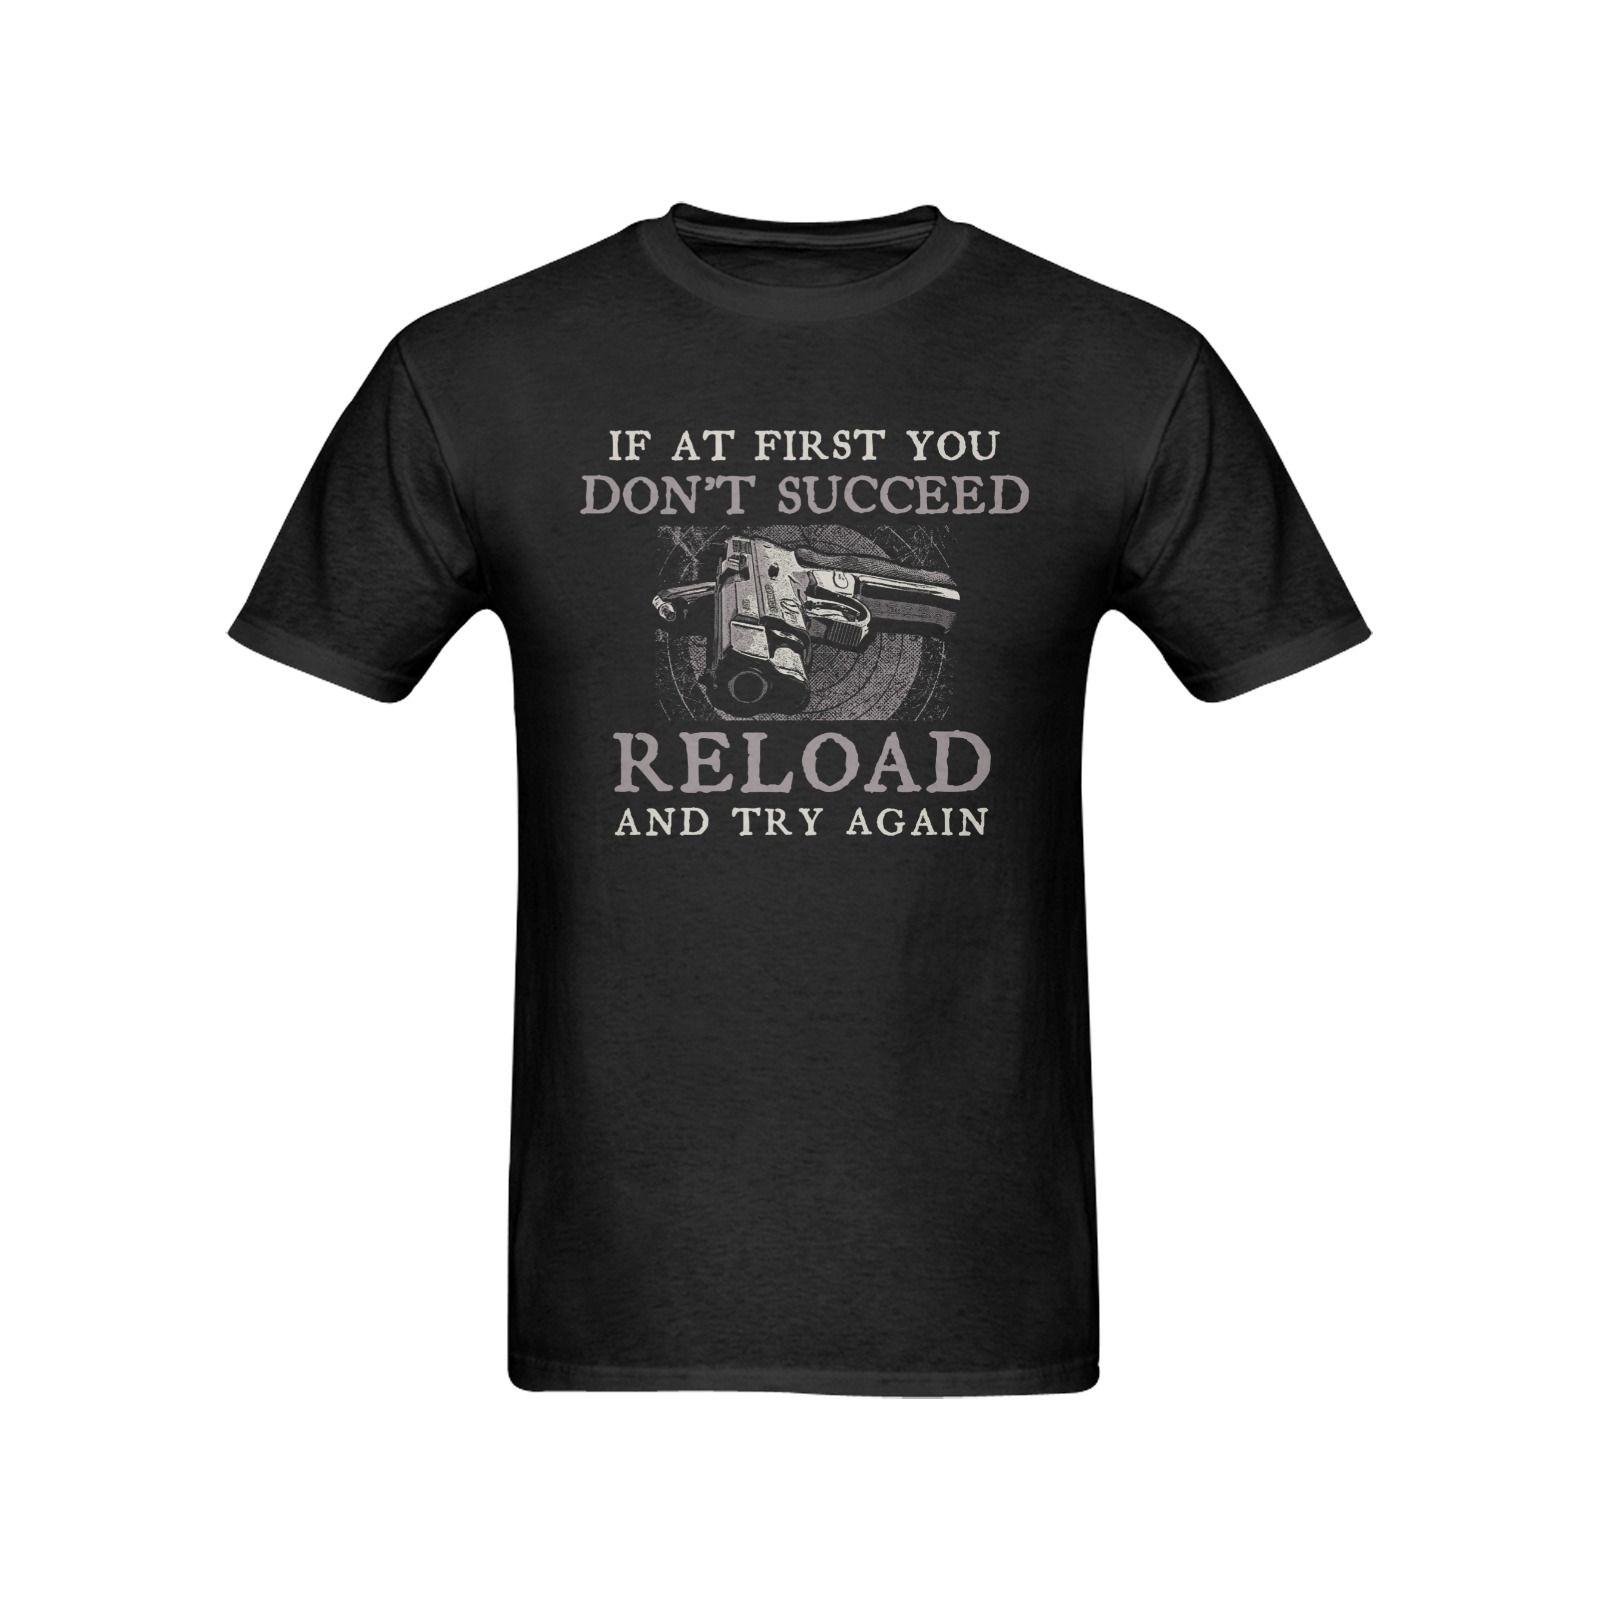 “If At First You Don’t Succeed, Reload And Try Again” – Men’s T-Shirt | Black